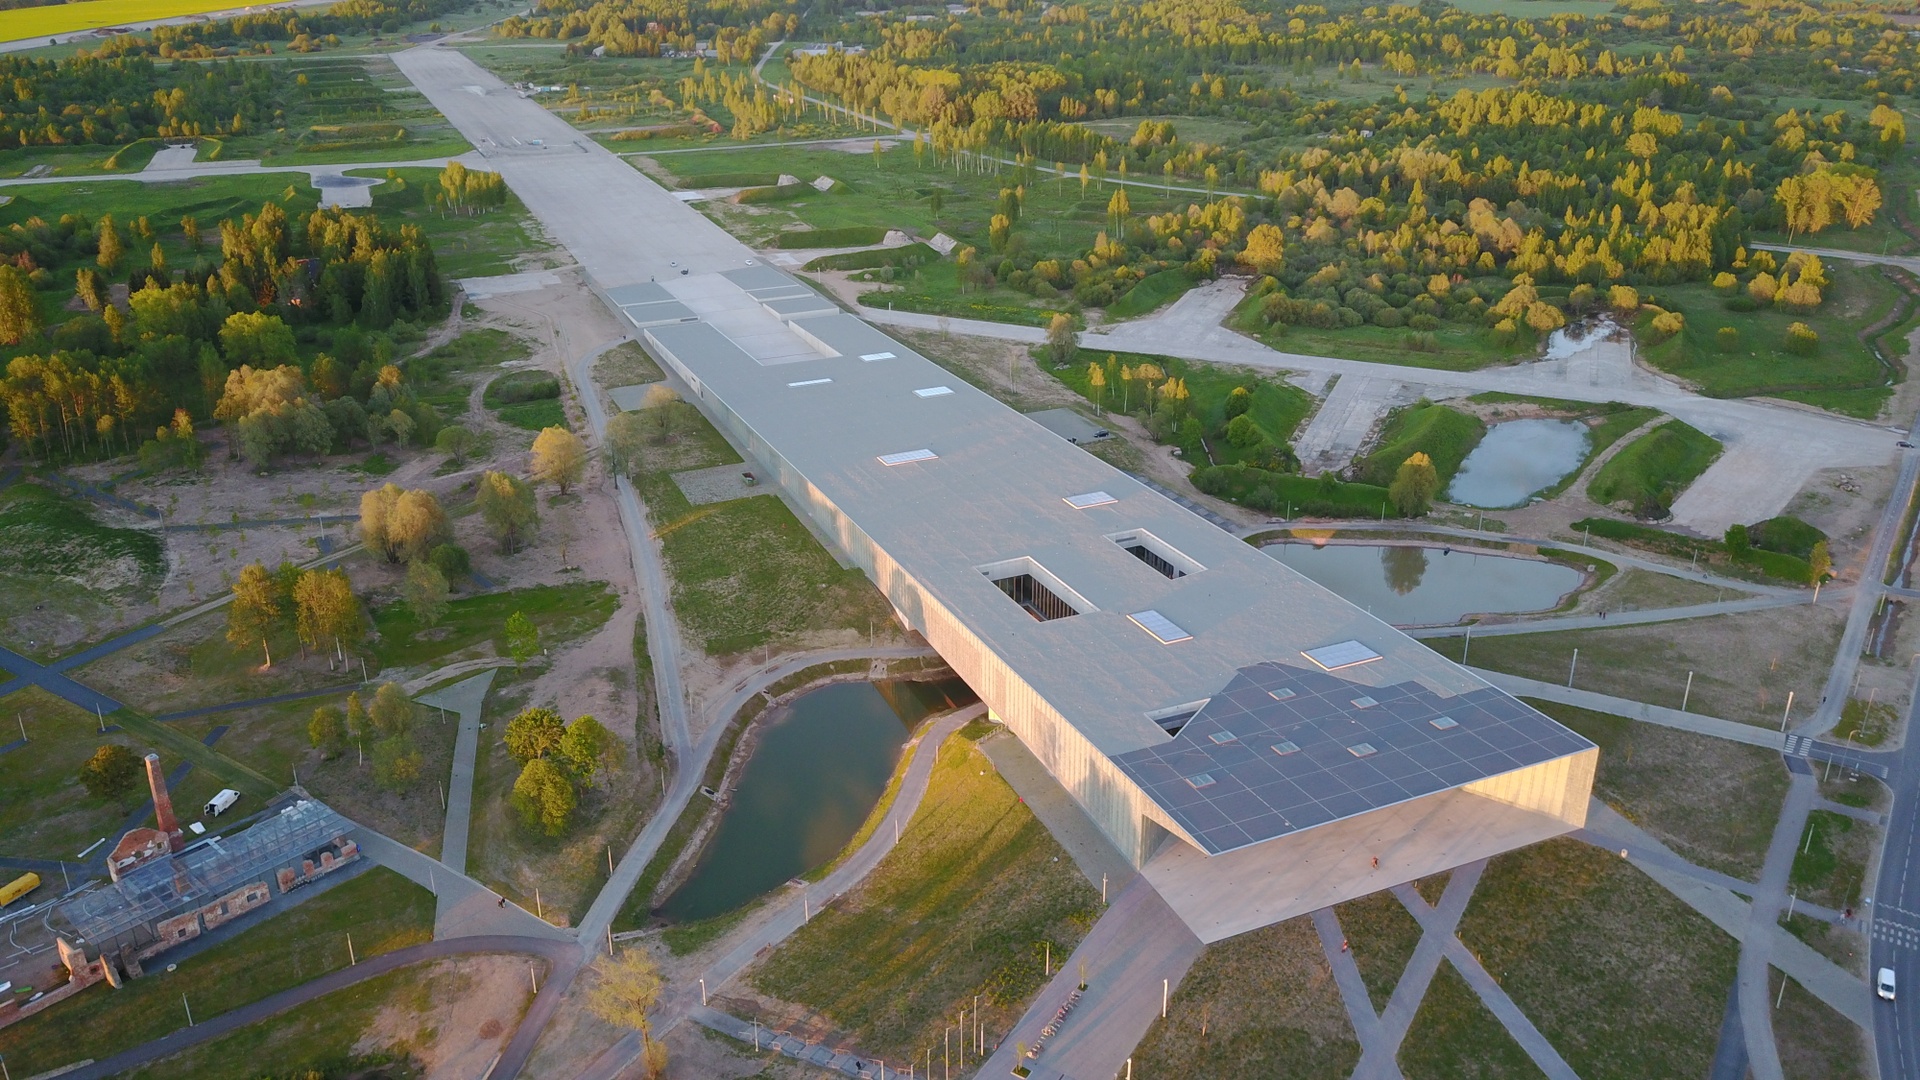 A bird's-eye view of the National Museum of Estonia